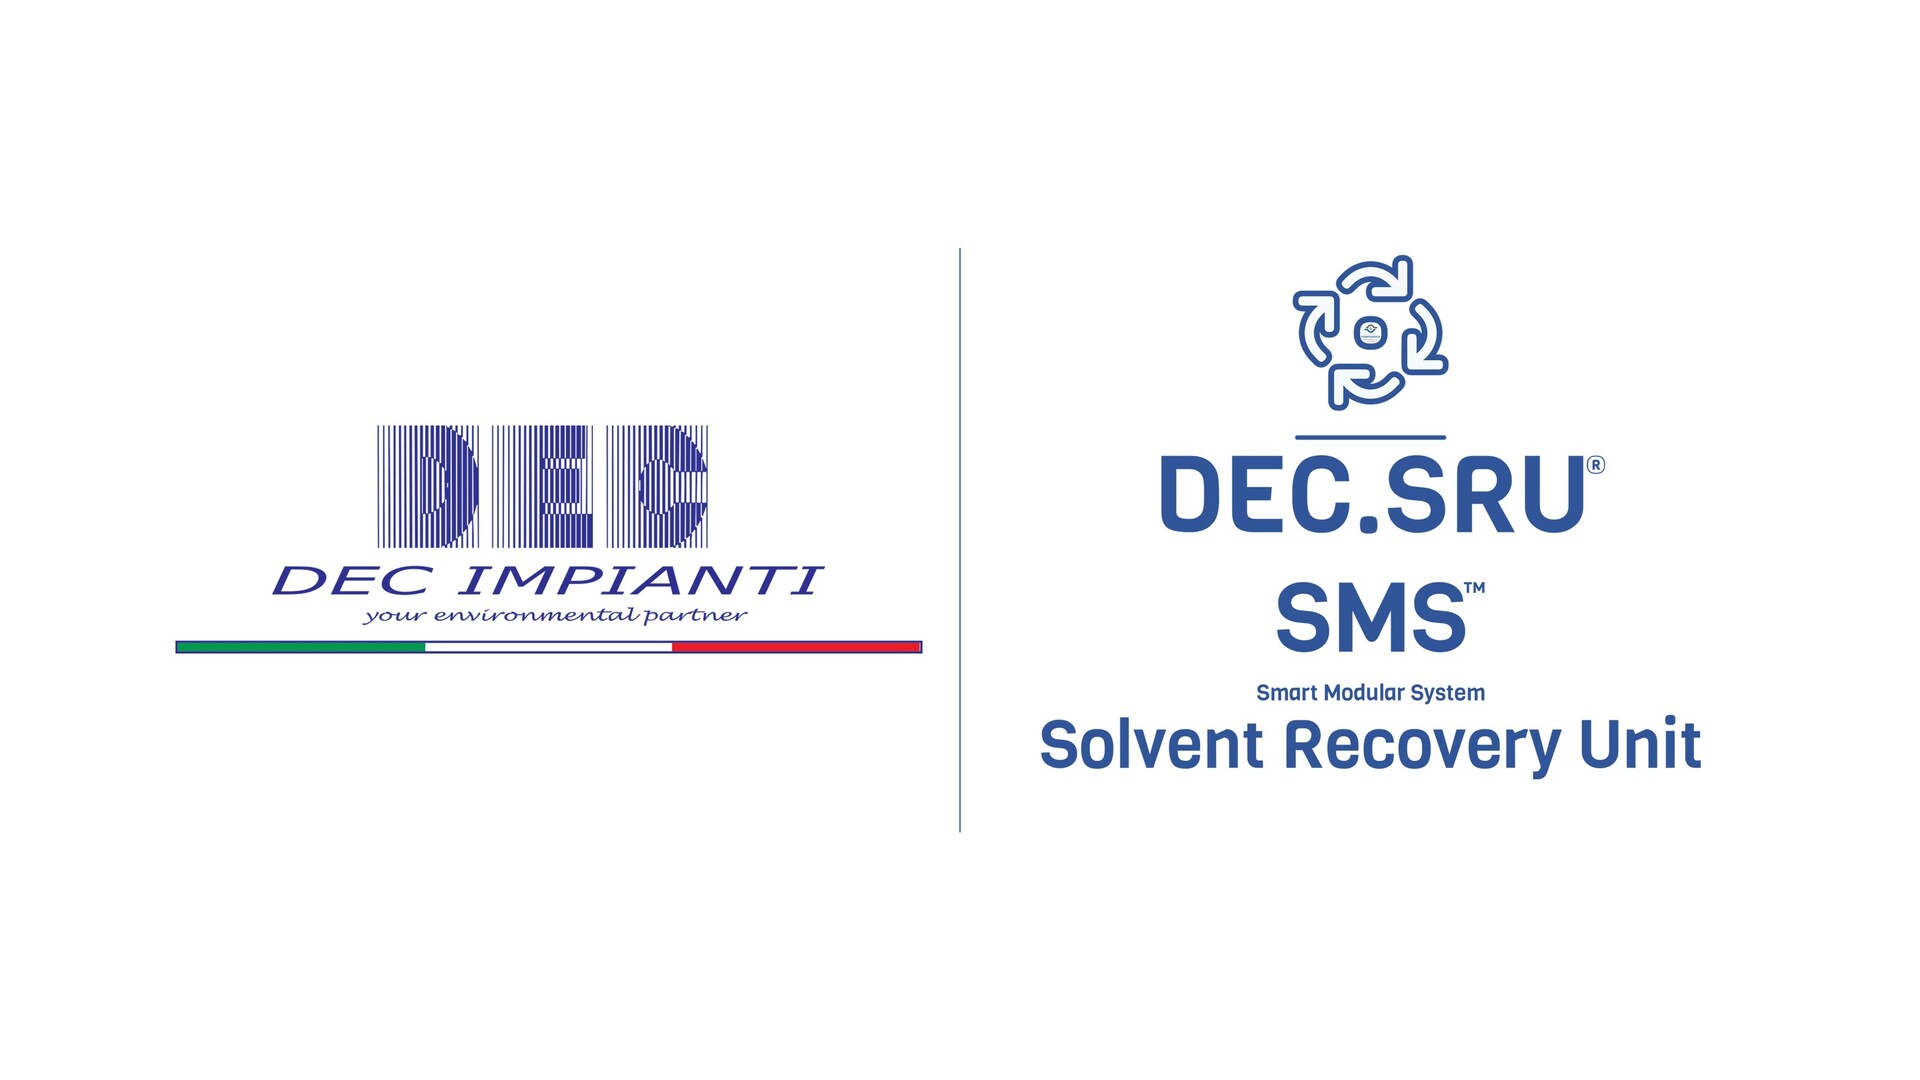 DEC, DEC IMPIANTI, DEC HOLDING, DEC SERVICE, DEC ENGINEERING, DEC AUTOMATION, DEC LAB, DEC ANALYTICS, DEC.SMS, SMS, SRU, Smart Modular System System, VOC emission control, solvent recovery, VOC recovery, VOC abatement, VOC emission control technology, VOC abatement systems, air pollution control, solvent recovery systems, environmental compliance, VOC recovery system, solvent recovery unit, VOC recovery equipment, BAT, Best Available Technique, BREF, IED, Industrial Emissions Directive, solvent recovery equipment, solvent recycling, VOC capture, solvent reclamation, solvent purification, VOC treatment, solvent regeneration, distillation, solvent distillation, VOC recovery process, activated carbon, adsorbent, nitrogen, oxidizer, thermal oxidation, regenerative thermal oxidizer, LEL monitoring, solvent recovery for flexible packaging, flexible packaging, converting, engineering, supply, turnkey, sustainable, innovation, decarbonization, low carbon emissions, green deal, carbon reduction, low carbon, carbon neutrality, net-zero emissions, greenhouse gas mitigation, carbon footprint, carbon capture and storage (CCS), GHG, CO2, energy efficiency, chemical recycling, recycling, sustainability solutions, sustainability, reclaiming, carbon offset, circular economy, climate change, climate policy, climate action, environmental challenges, sustainable development, sustainability roadmap, ESG, TBL